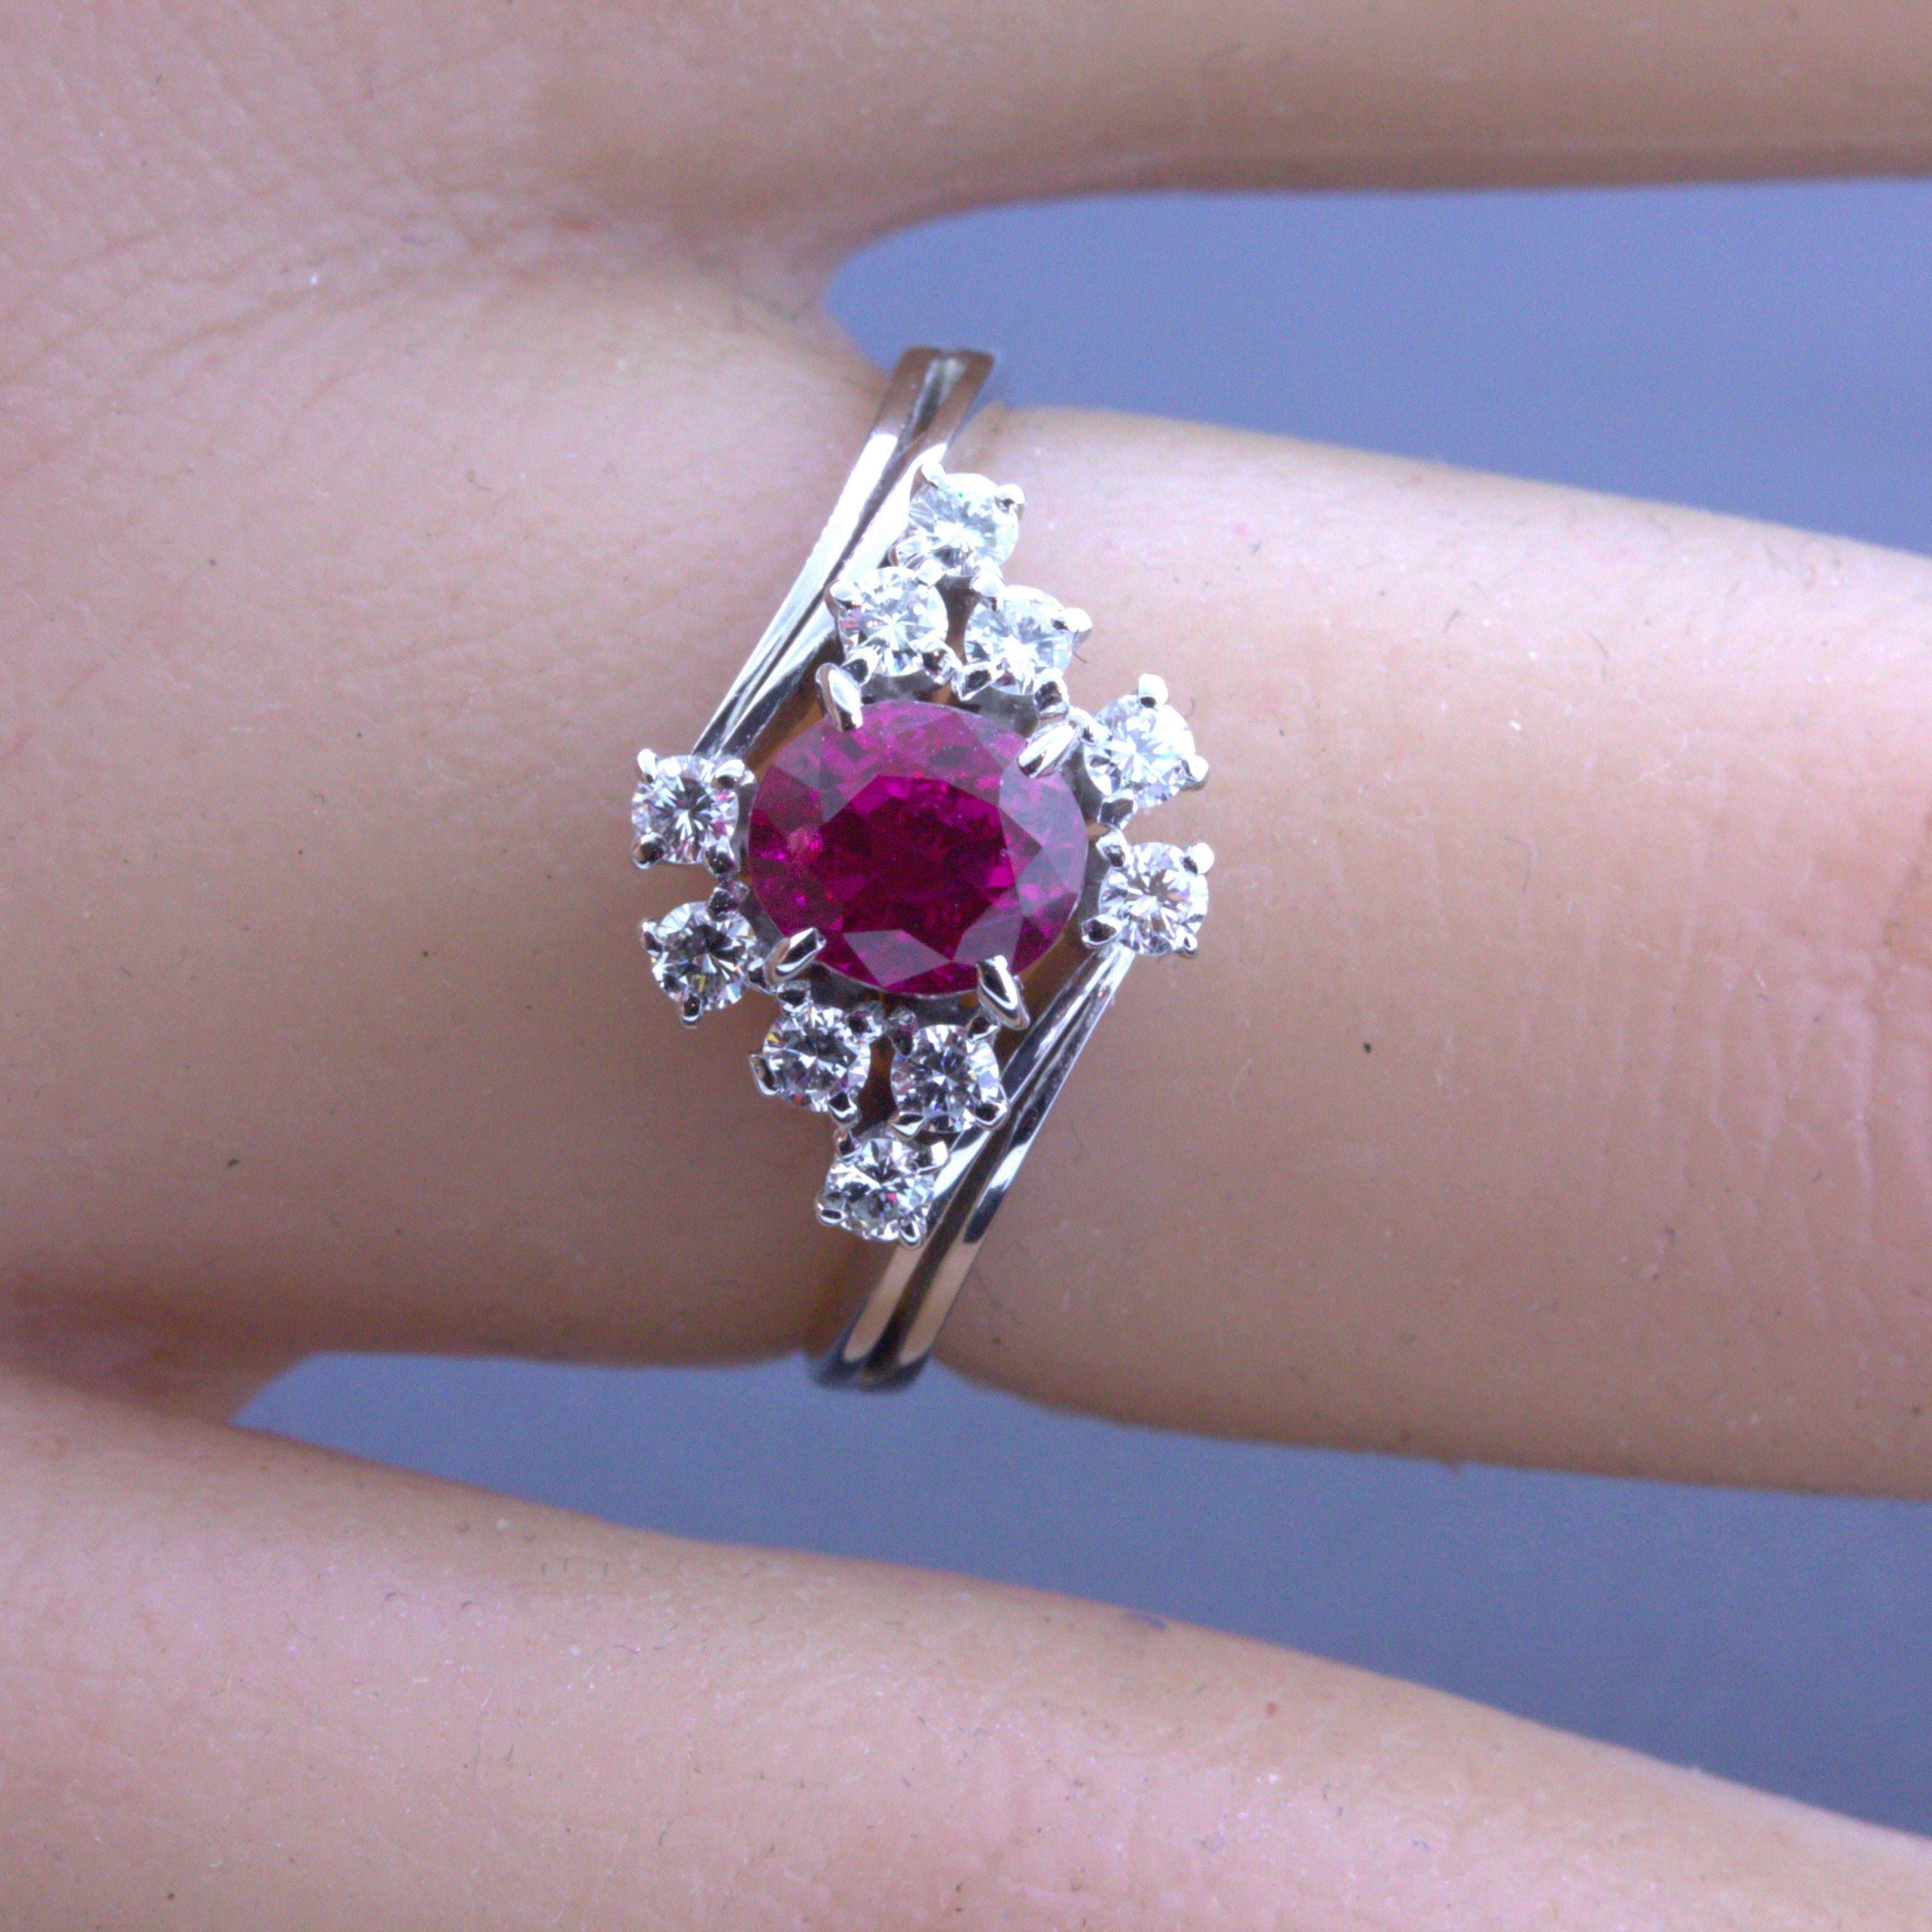 Superb 1.01 Carat Ho-Heat Burmese Ruby Diamond Platinum Ring, GIA Certified In New Condition For Sale In Beverly Hills, CA